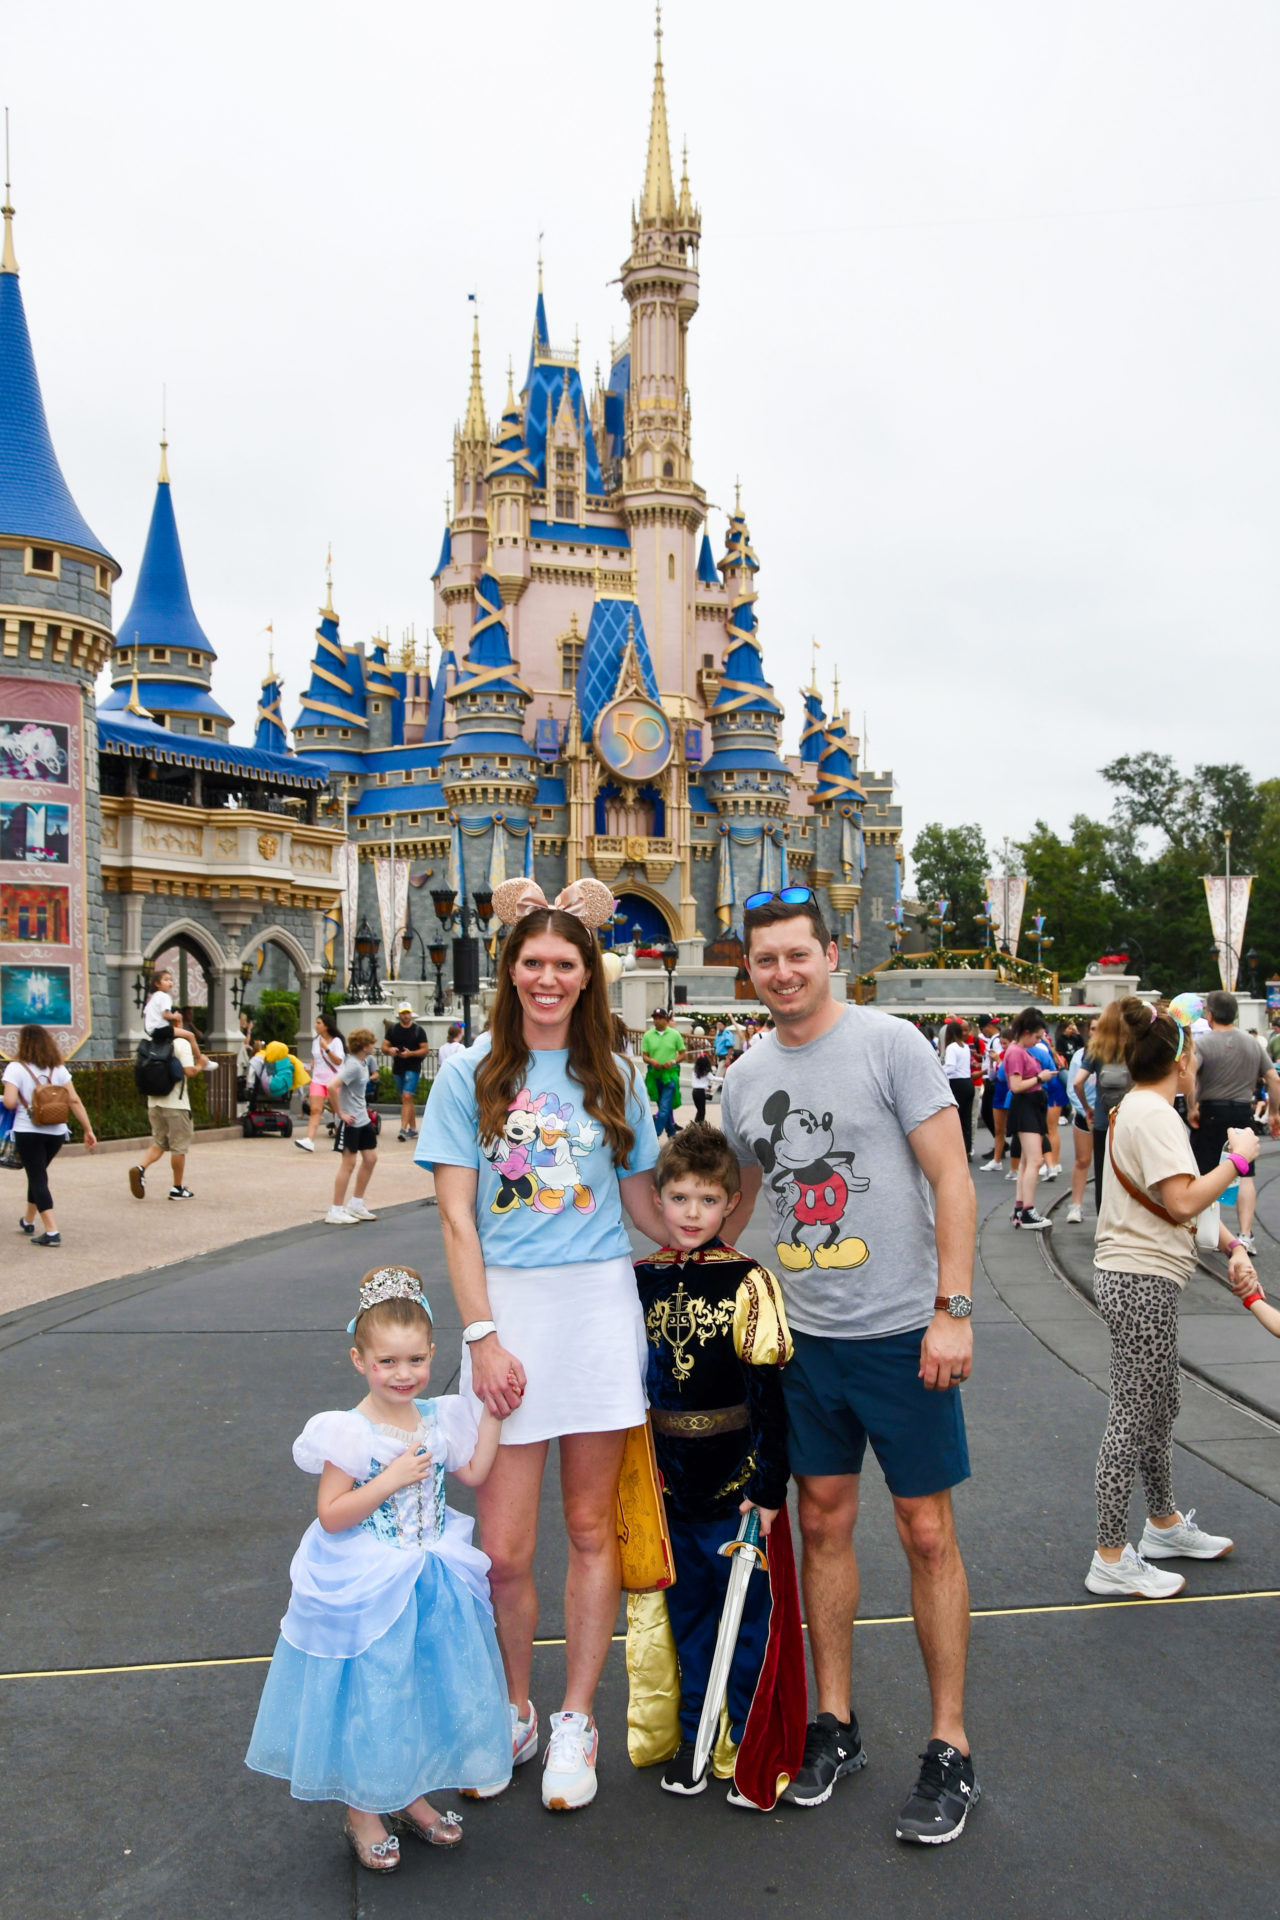 12 Things for Adults to Do at Walt Disney World Resort